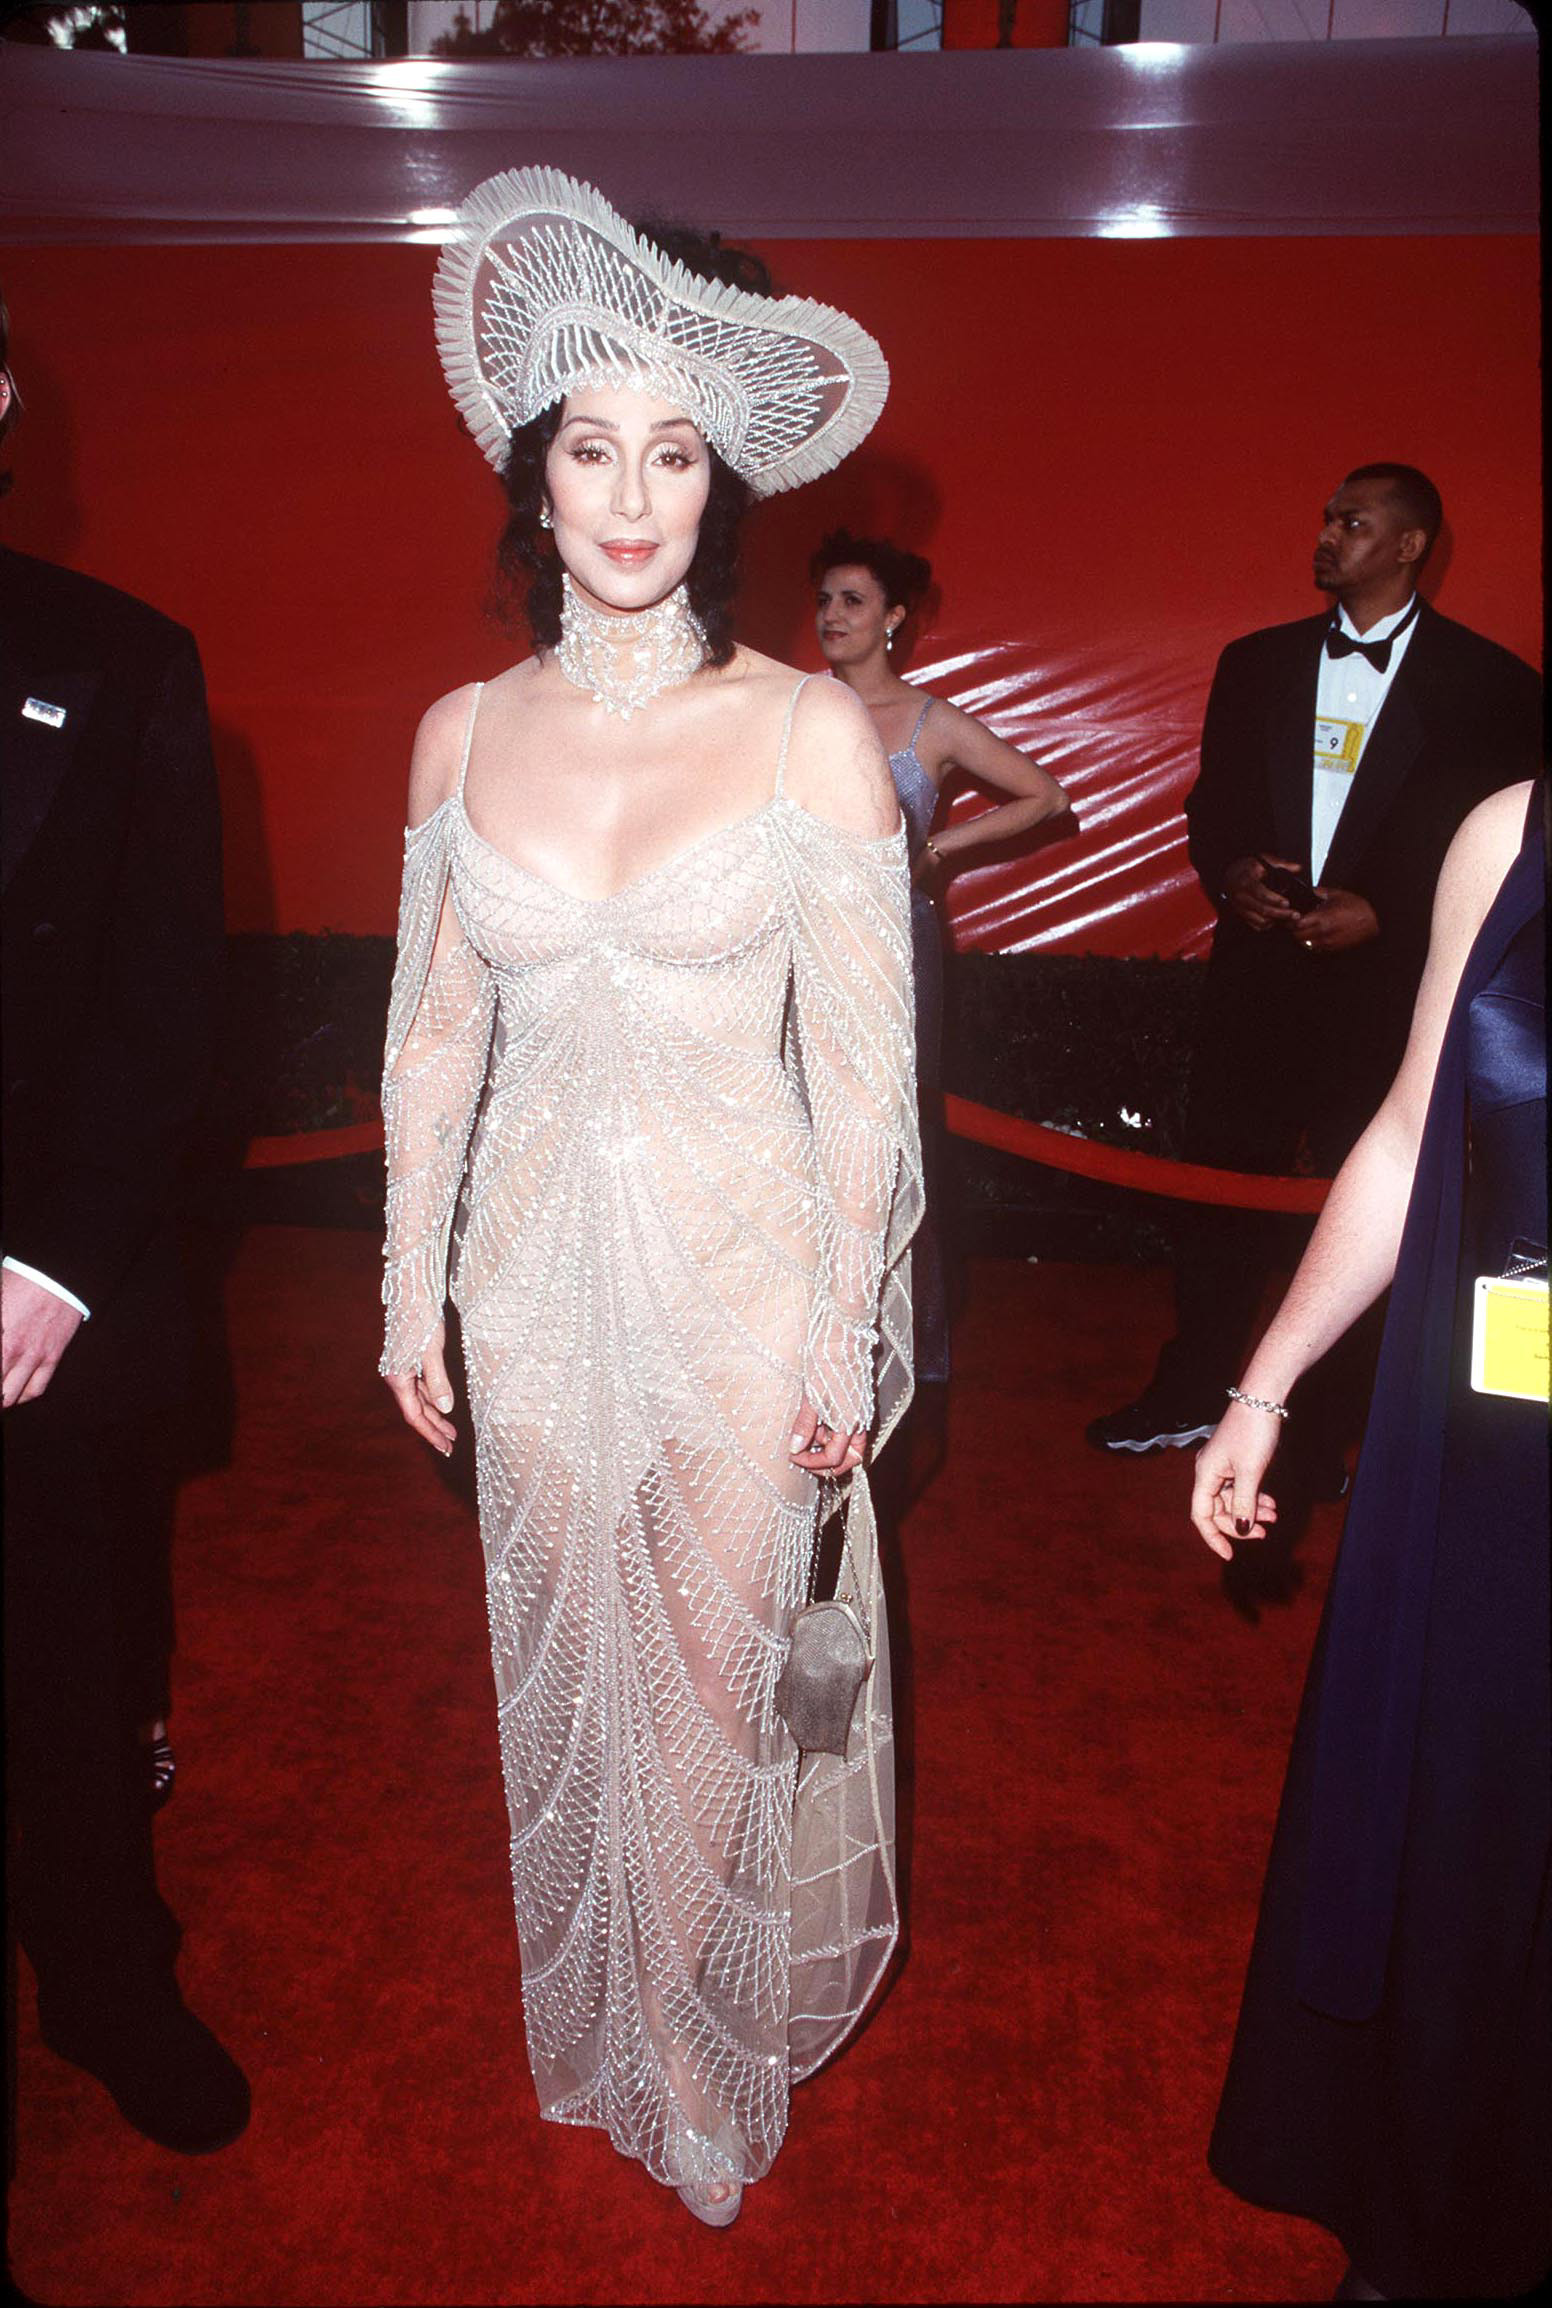 Cher during the 70th Annual Academy Awards in Los Angeles on March 23, 1998.